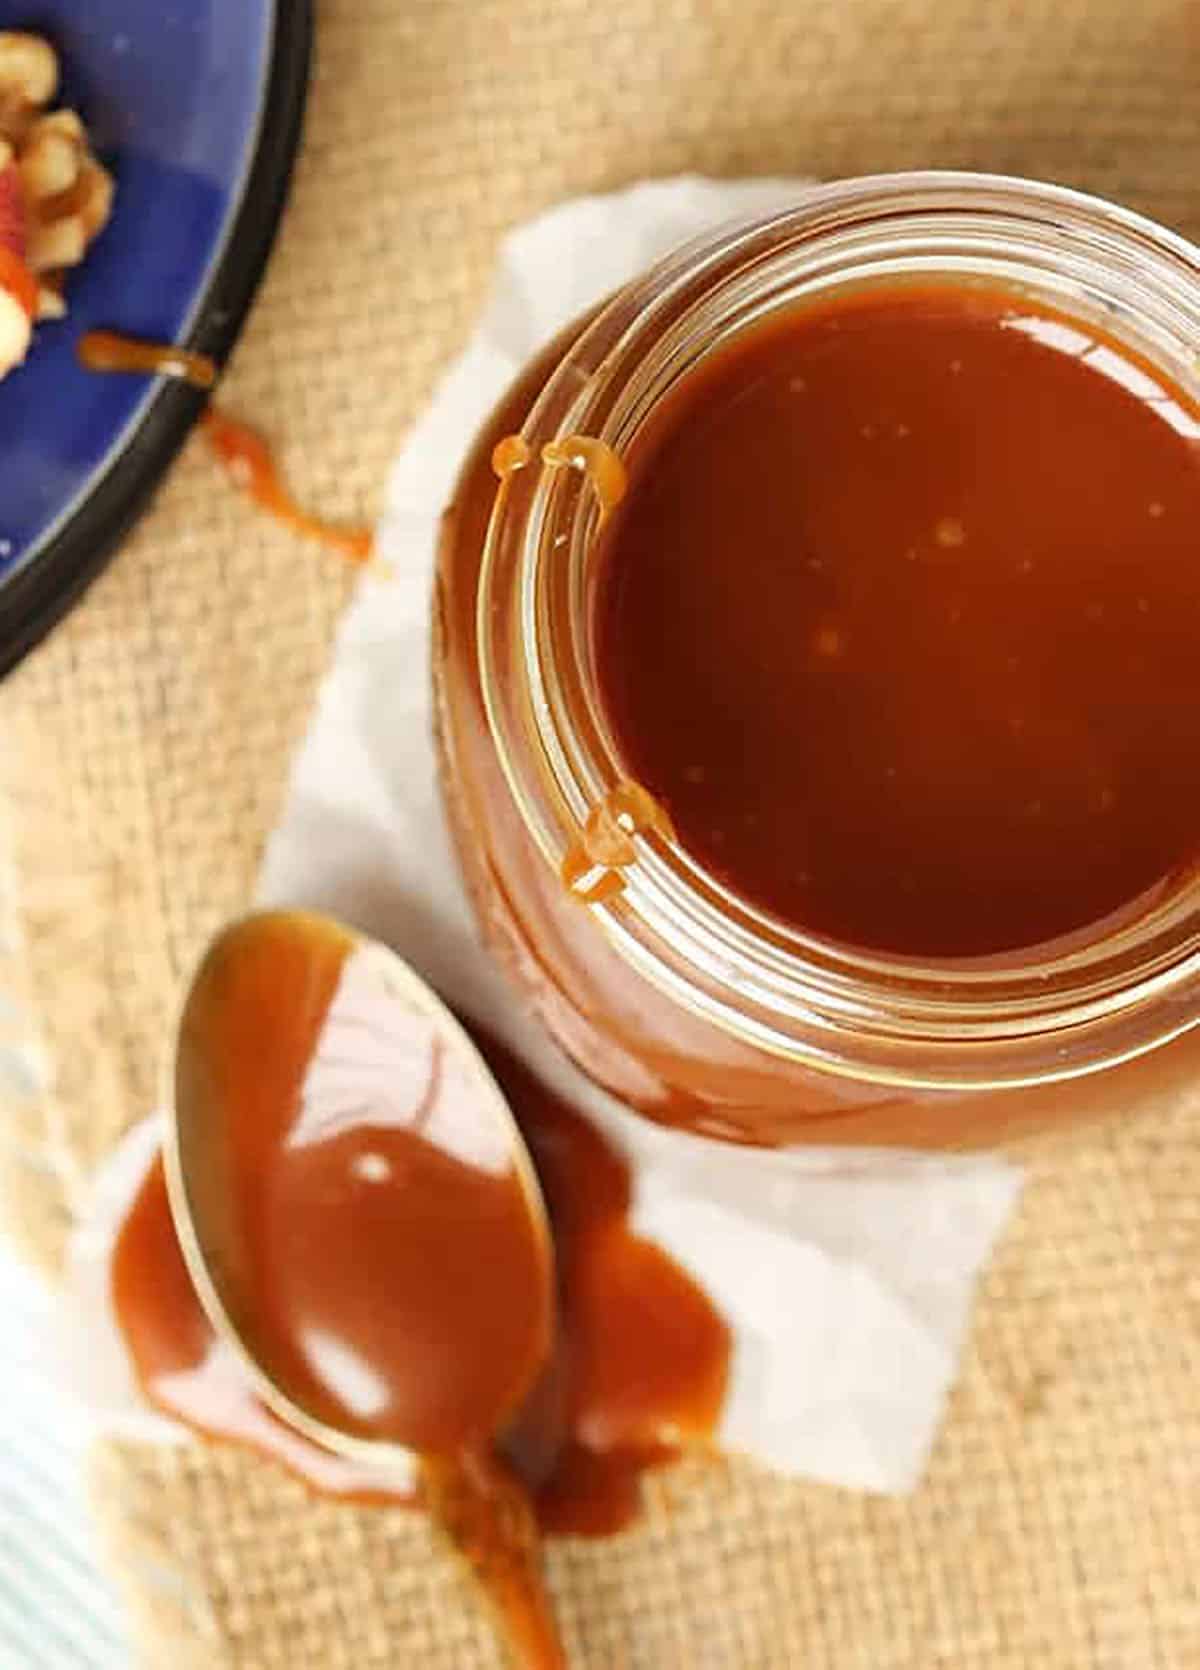 Caramel Sauce in a canning jar with a spoon filled with caramel sauce set next to it.